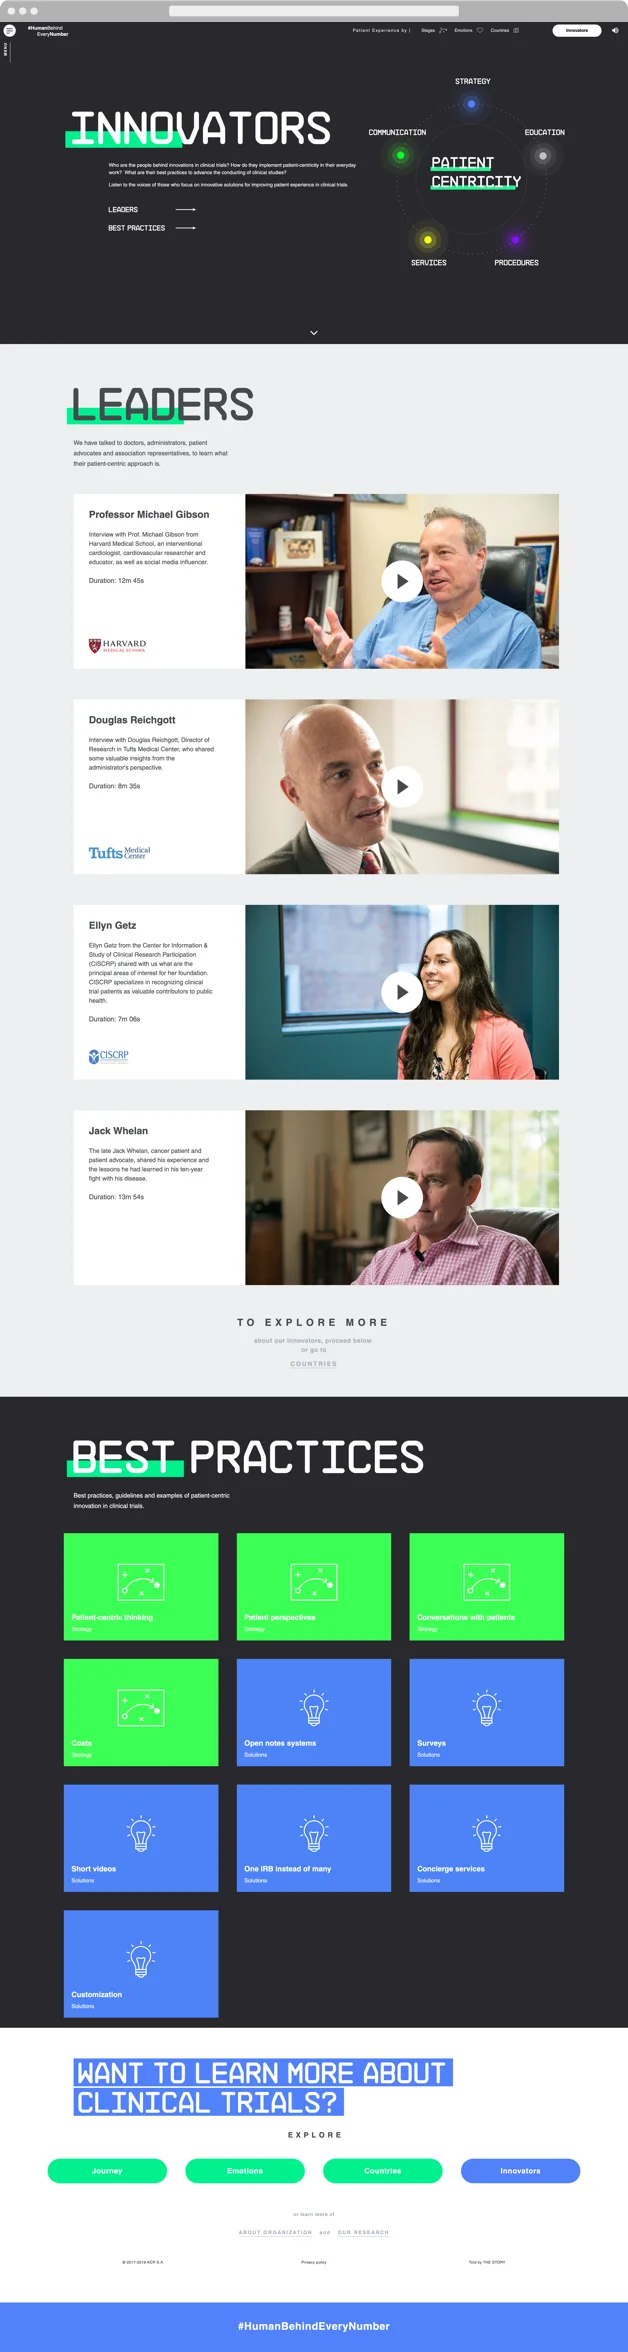 The best experts - image 